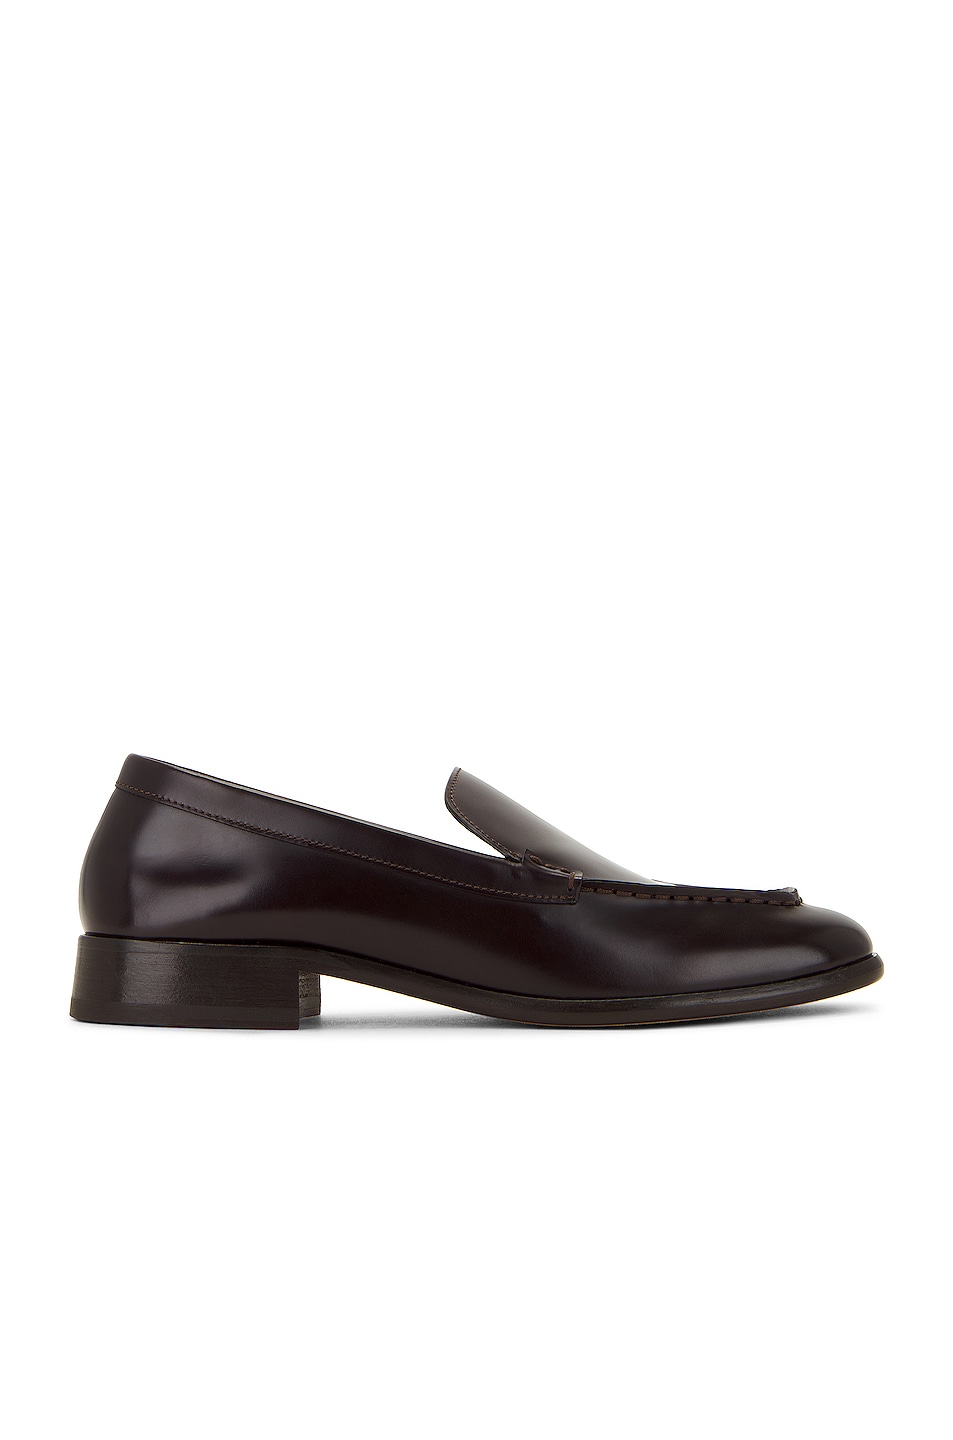 Image 1 of The Row Mensy Loafer in Bordeaux